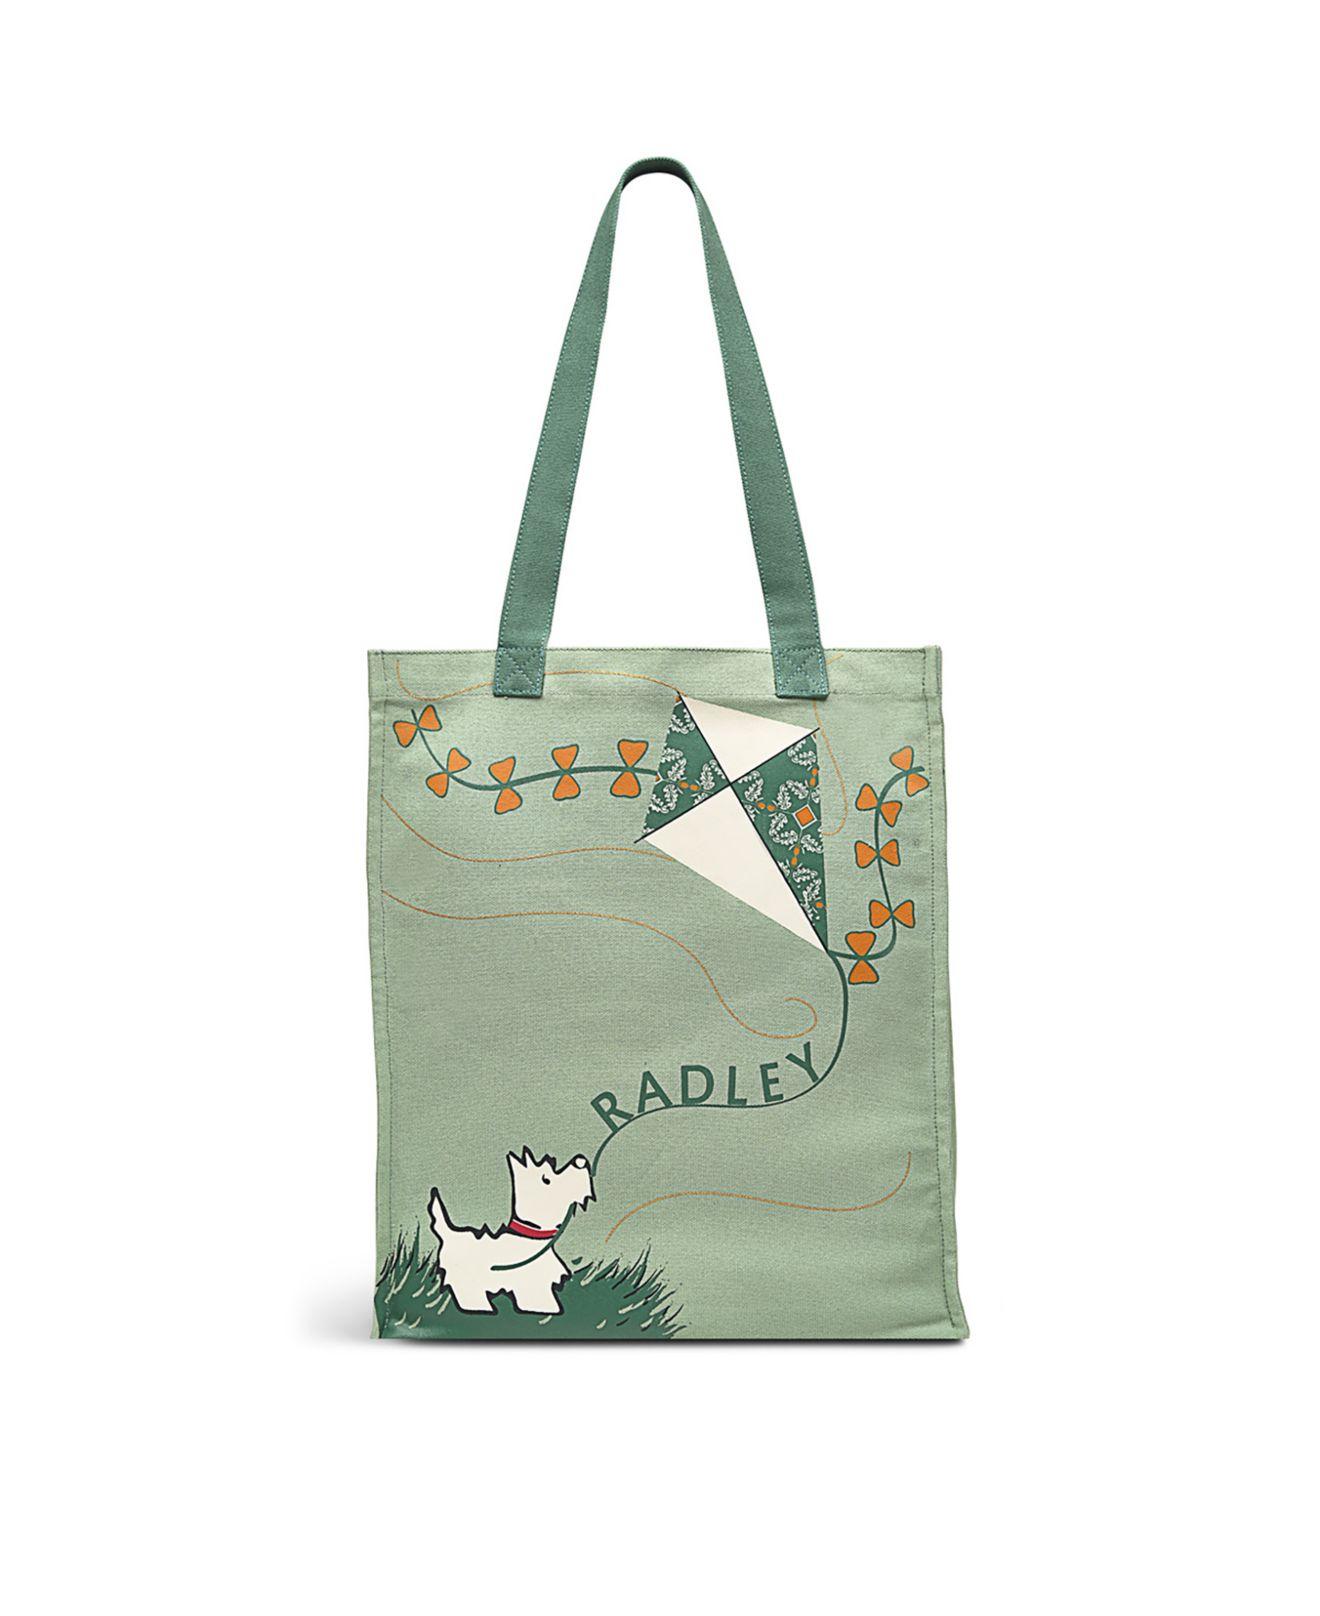 Radley Kite Flying Open Top Canvas Extra Large Tote Bag in Green | Lyst